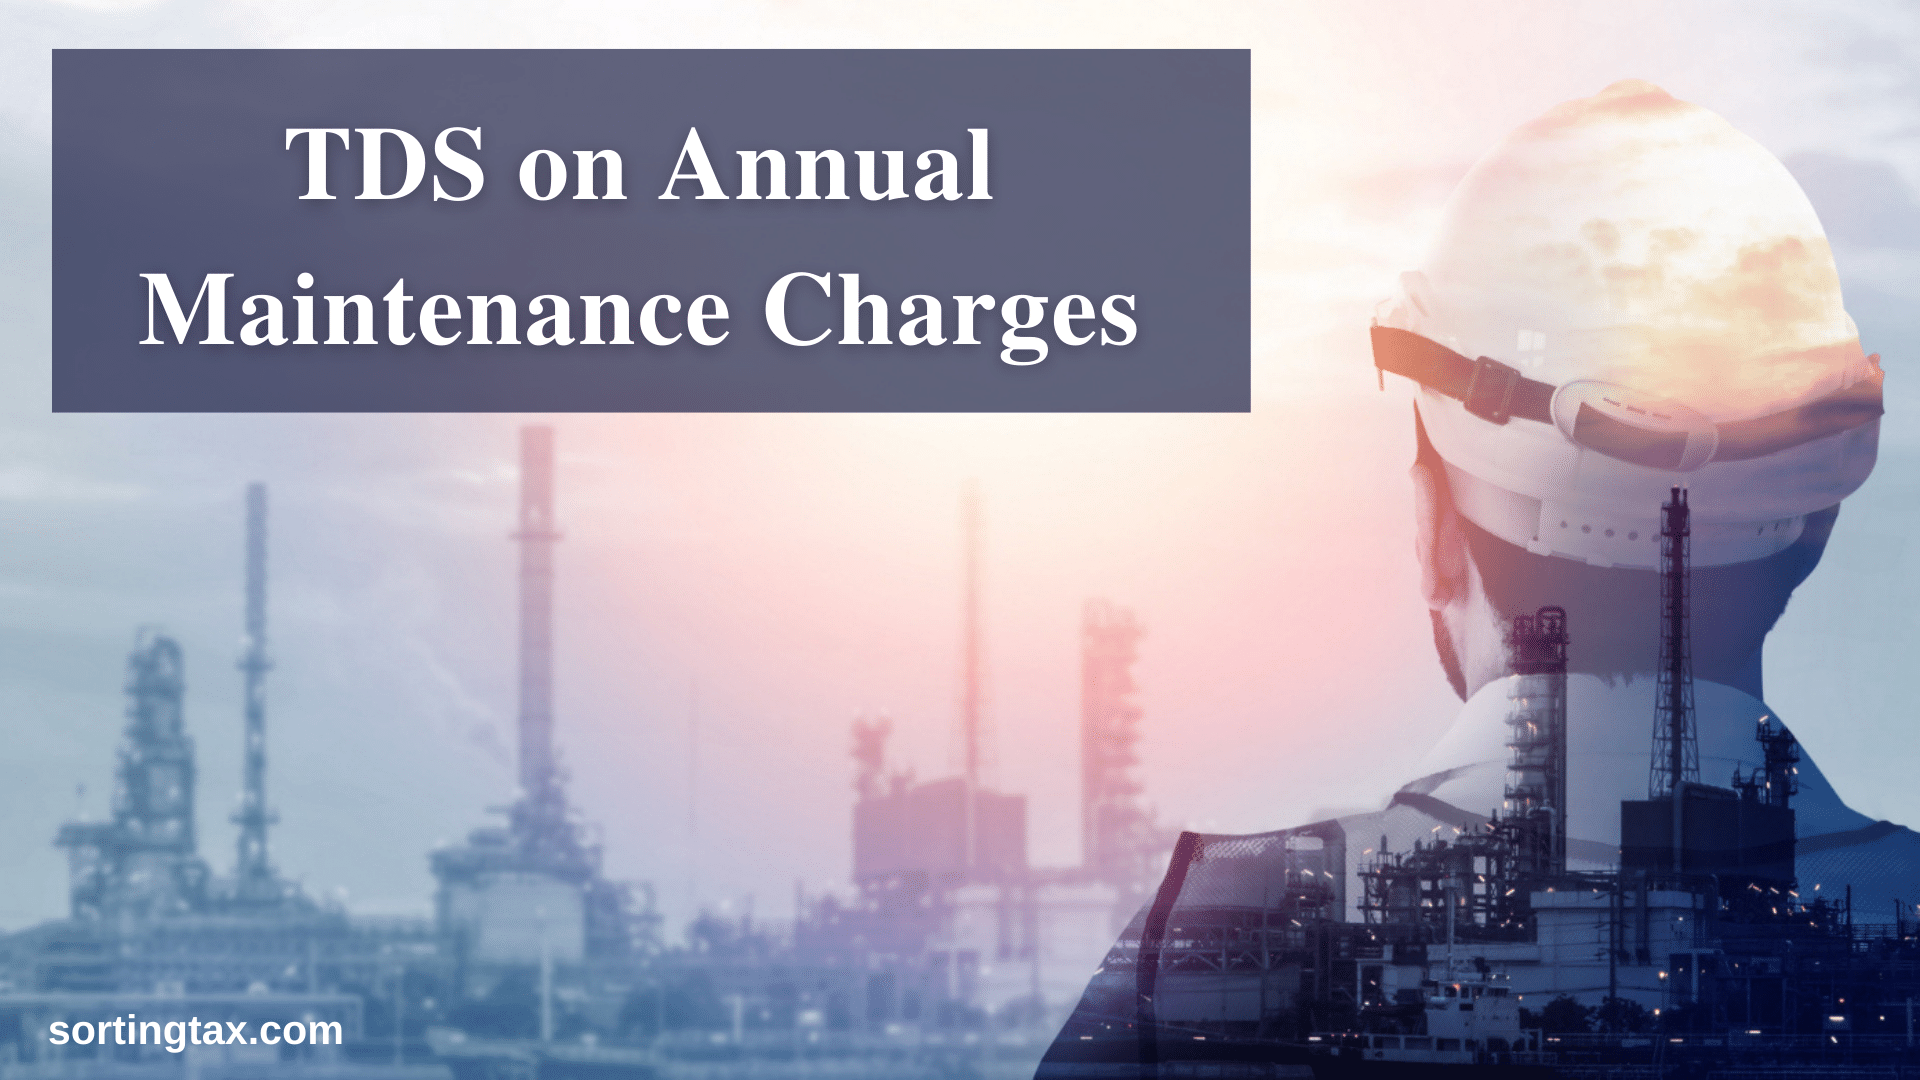 TDS on AMC Charges (Annual Maintenance Charges)